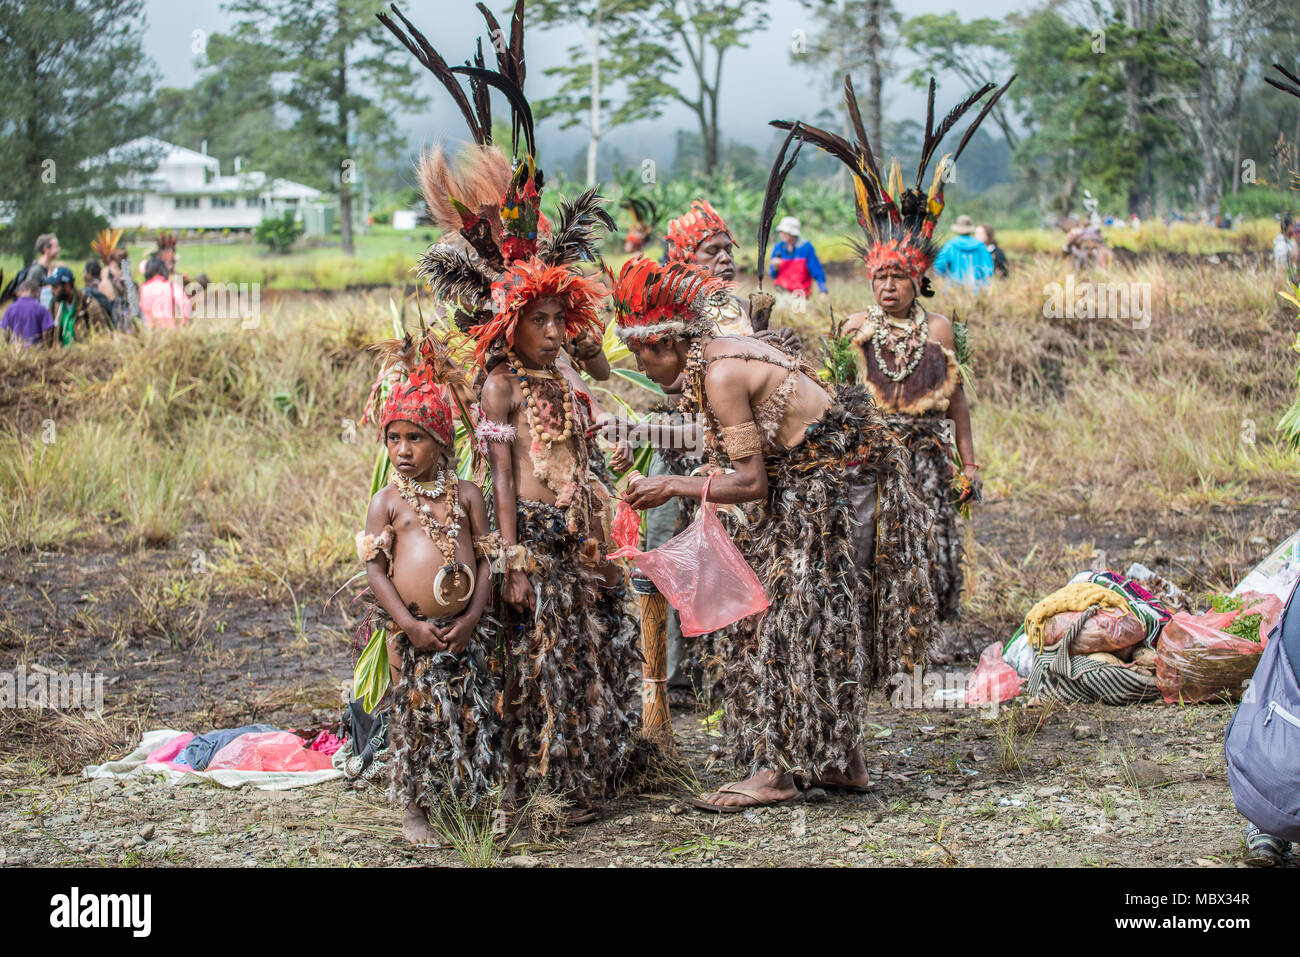 A group of women with traditional feathers costume and headdress, Mount Hagen Cultural Show, Papua New Guinea Stock Photo